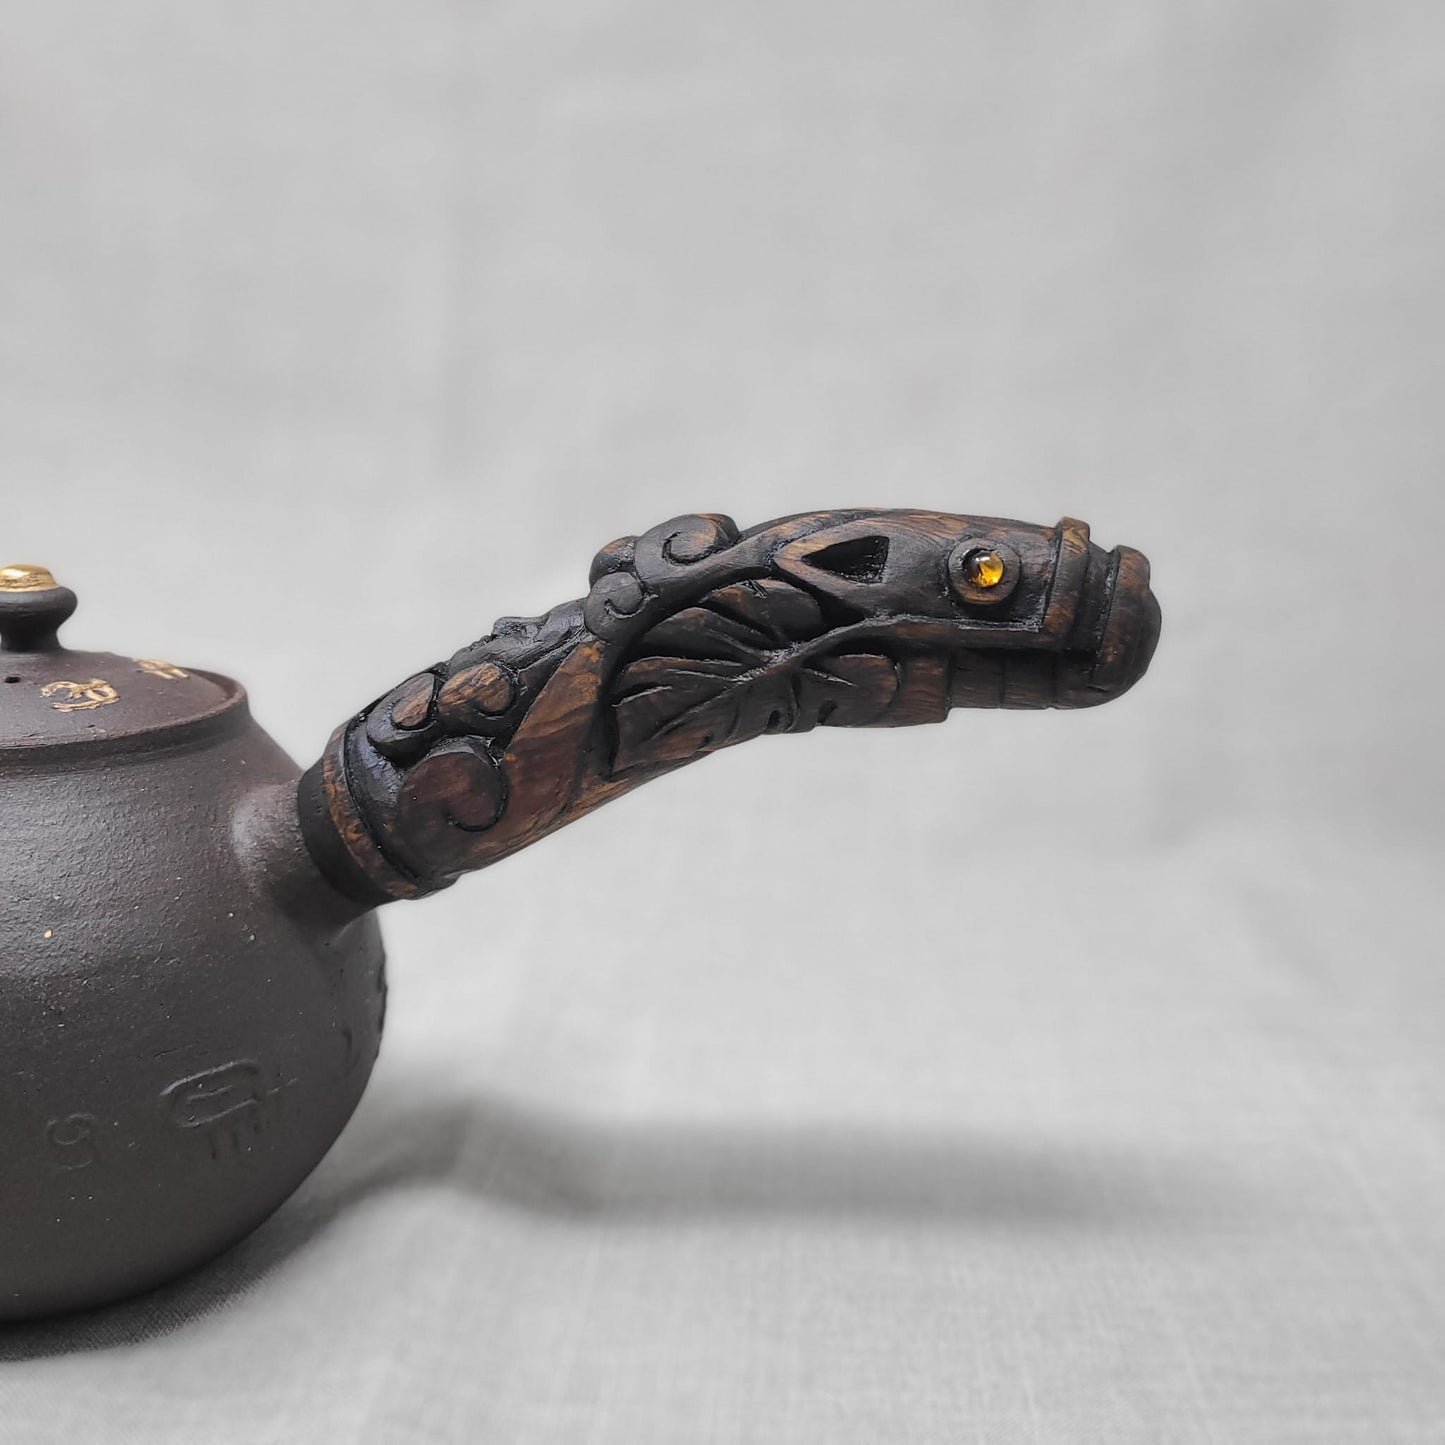 280ml "Forest Temple" Kyusu with a 250ml tea bowl